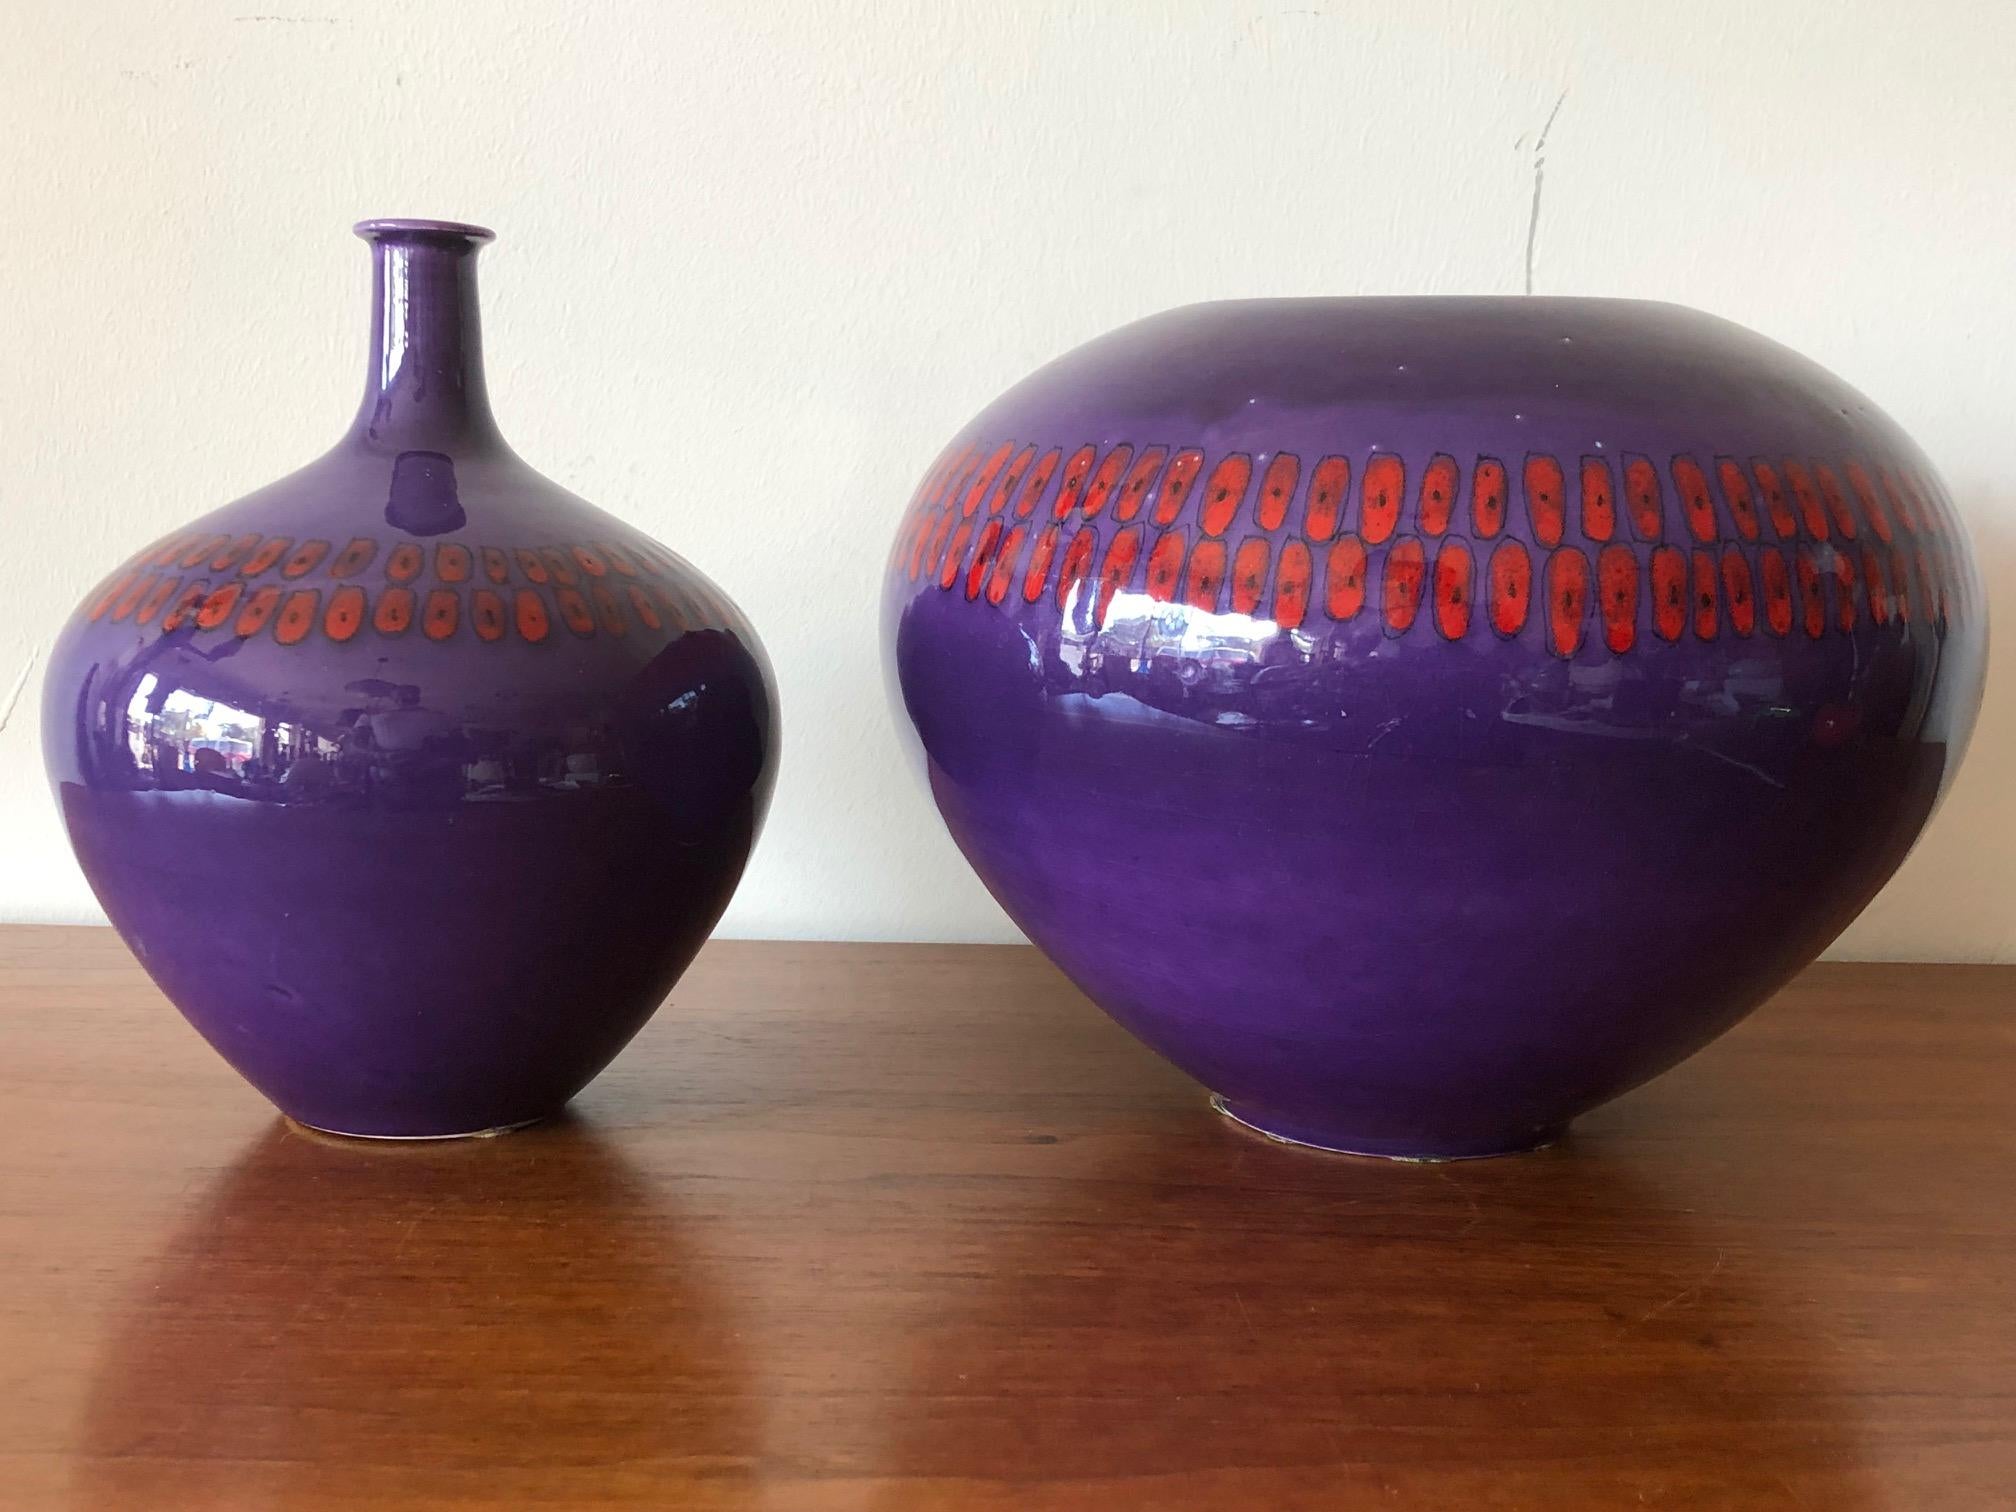 Two stylish vases by Alvino Bagni for Raymor, circa 1960s. Shiny purple glaze with red decorative detail. Both signed on the bottom, one measures 10